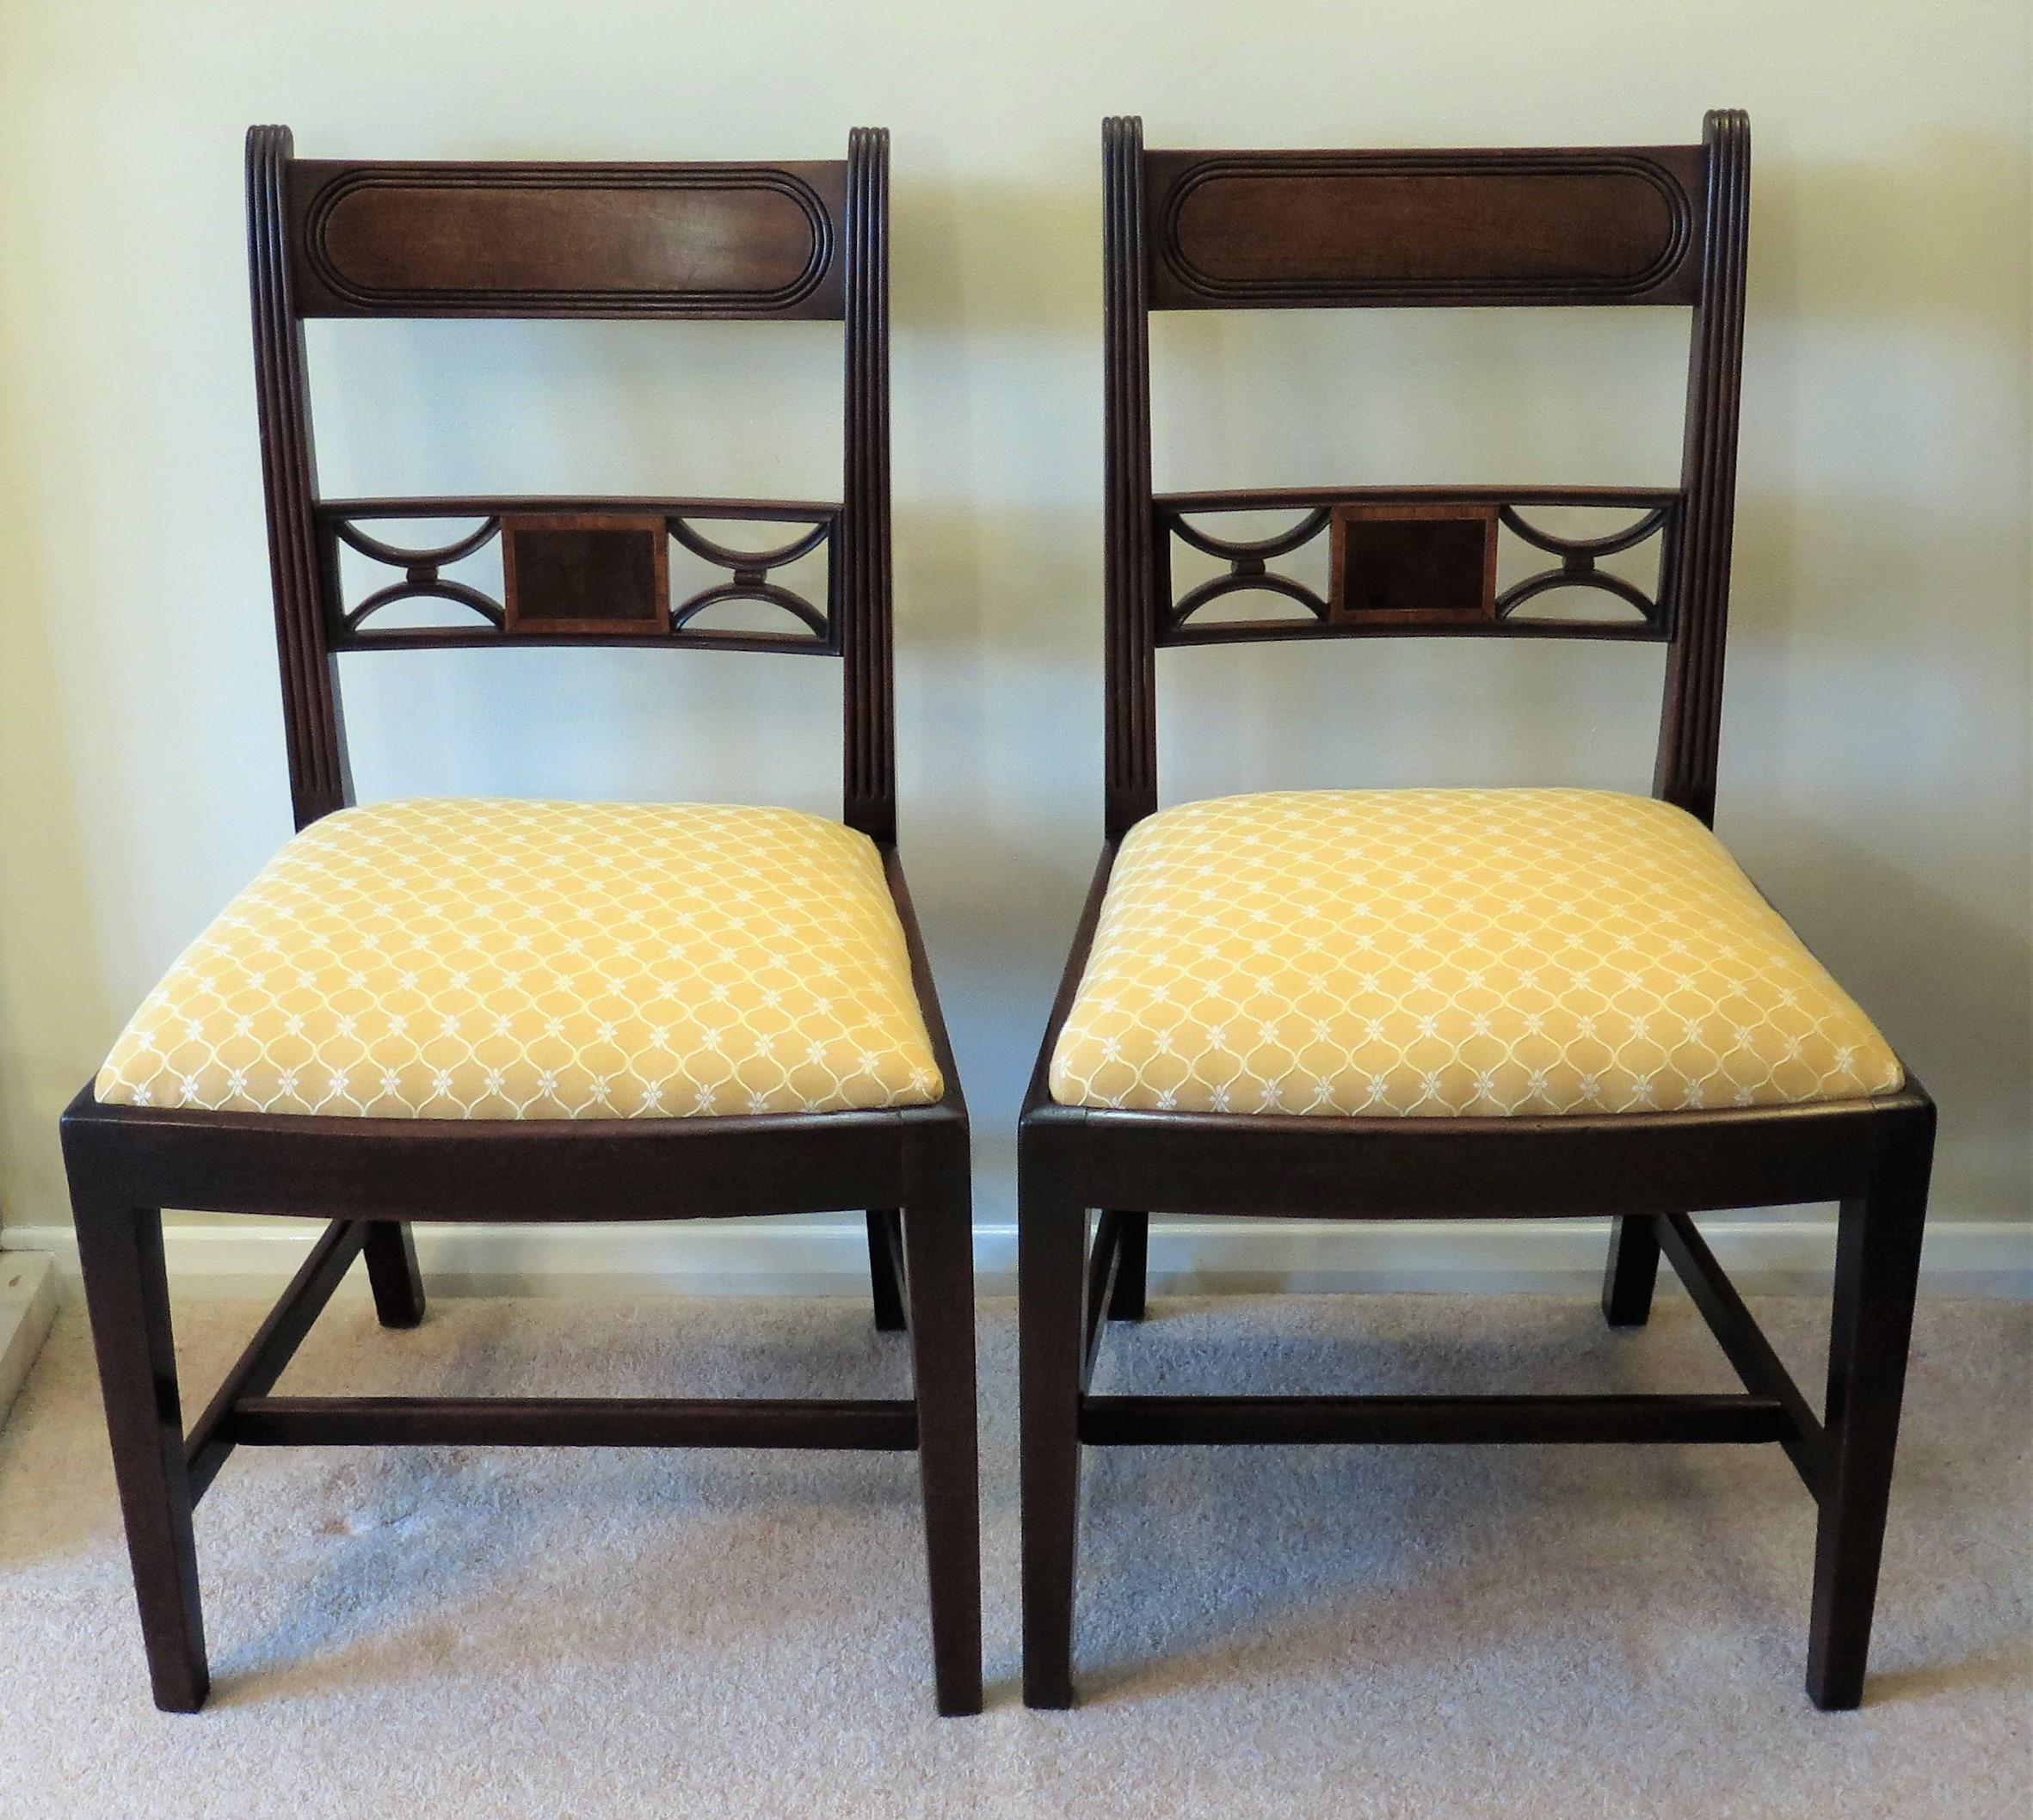 This a fine handmade pair of English, George 111rd, Sheraton period hardwood, possibly red walnut dining or side chairs with good carved detail and reupholstered drop in seats, dating to the late 18th century, circa 1790.

The chairs have many